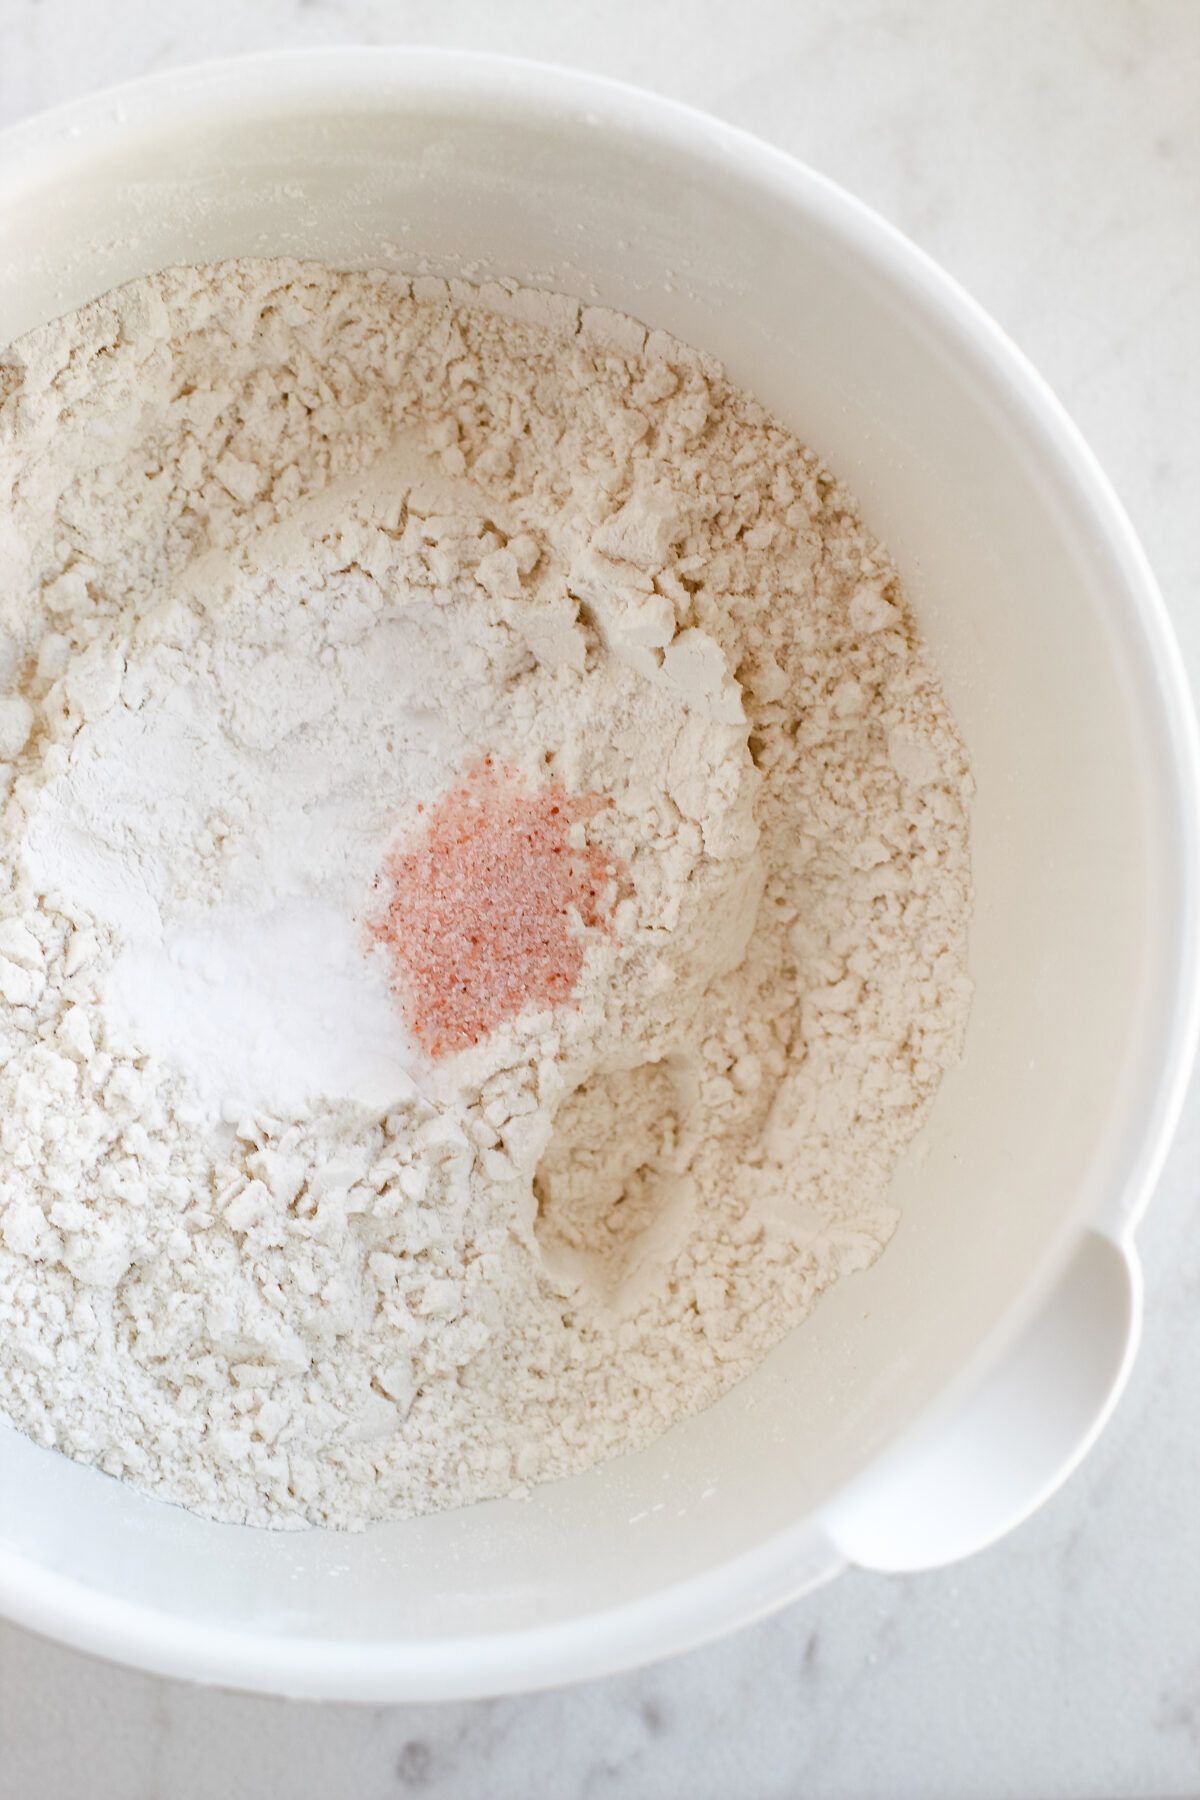 Dry ingredients in a large mixing bowl.